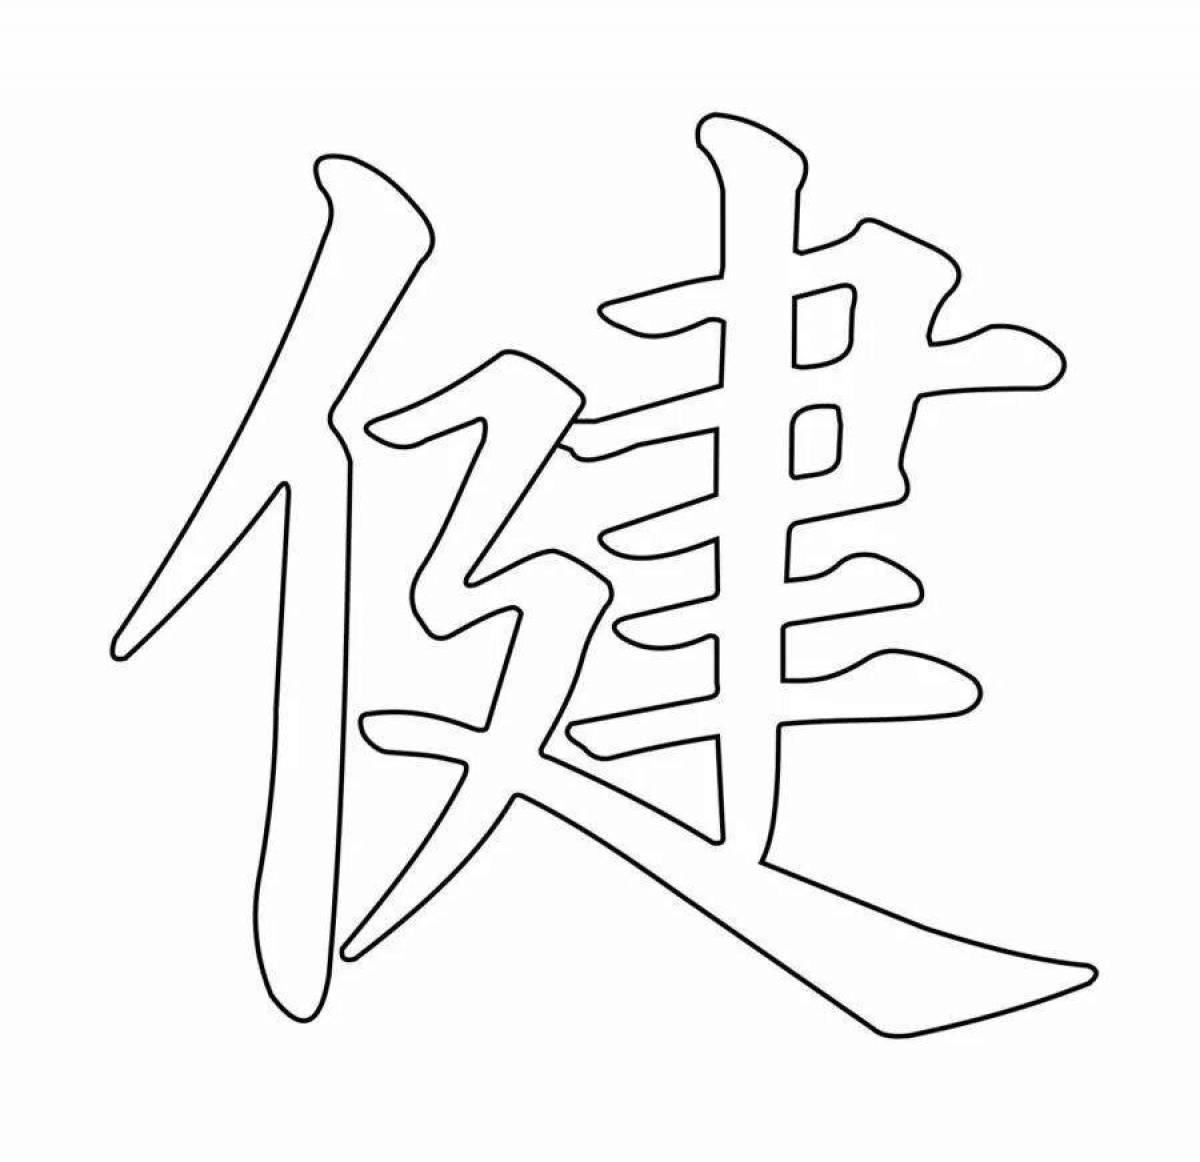 Chinese characters colorful coloring page